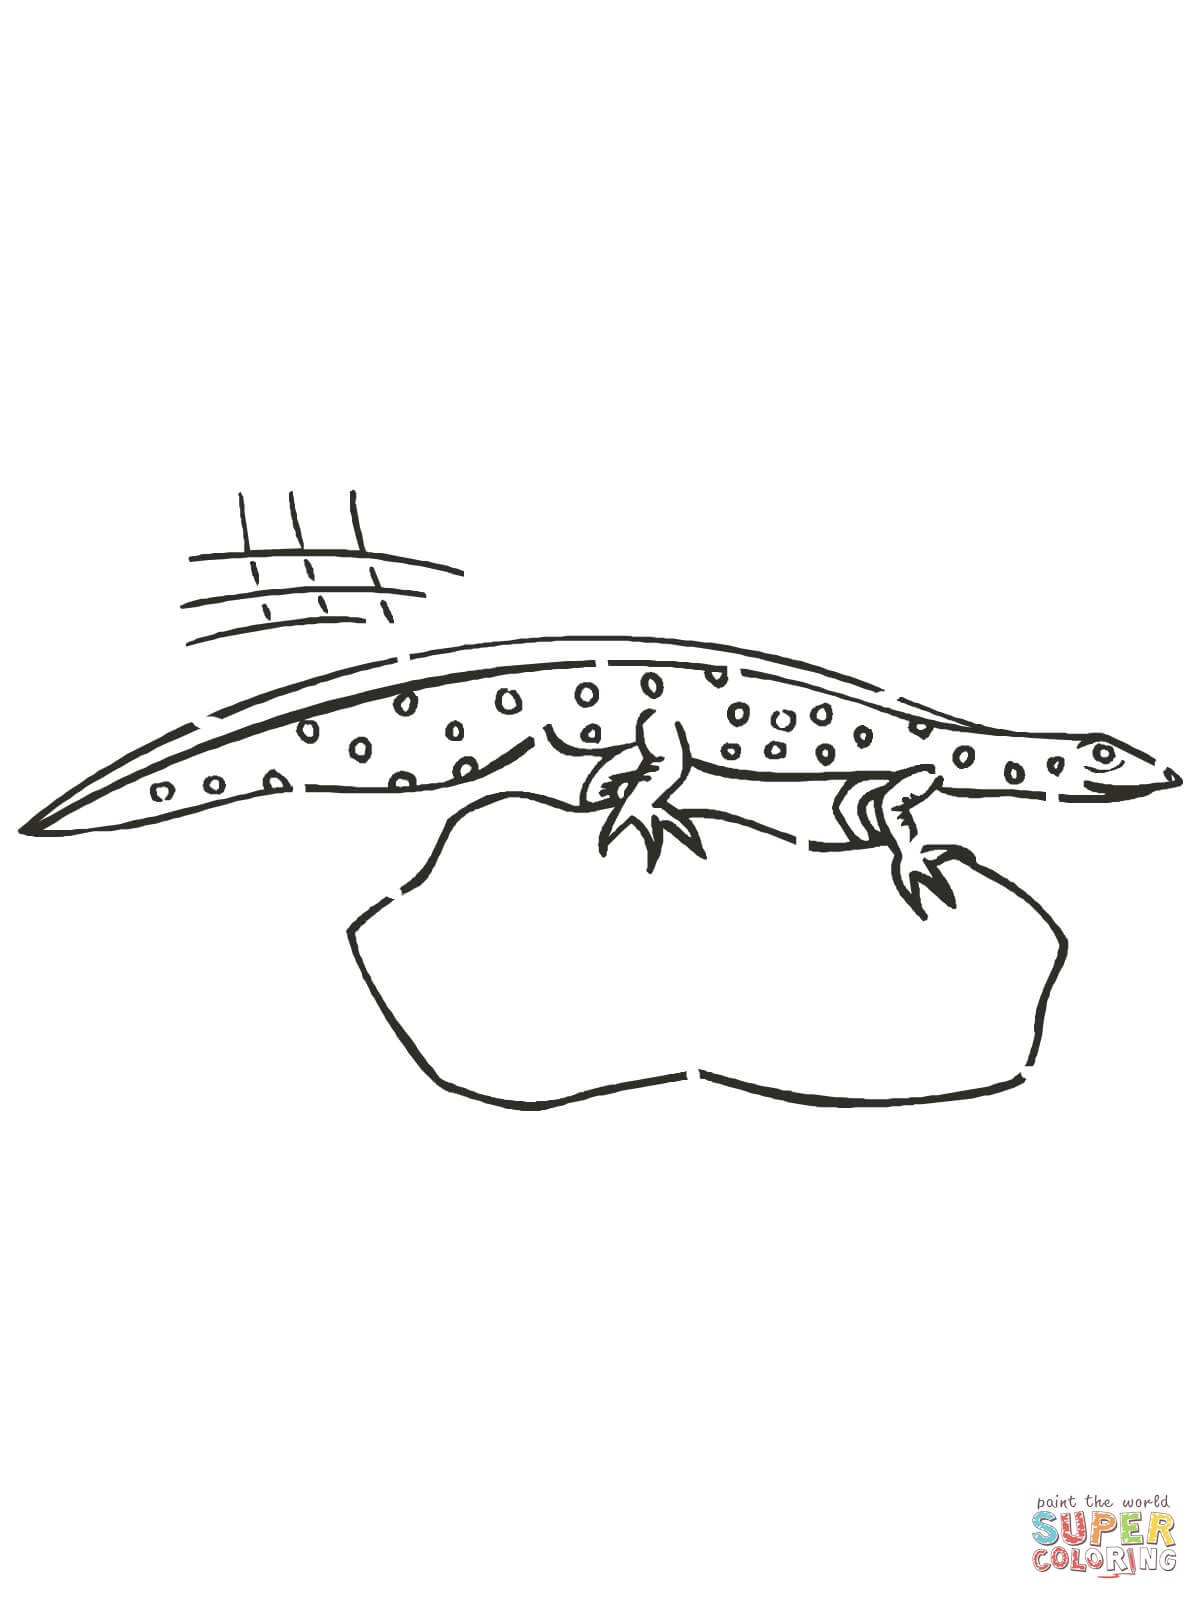 Newt Amphibian coloring page